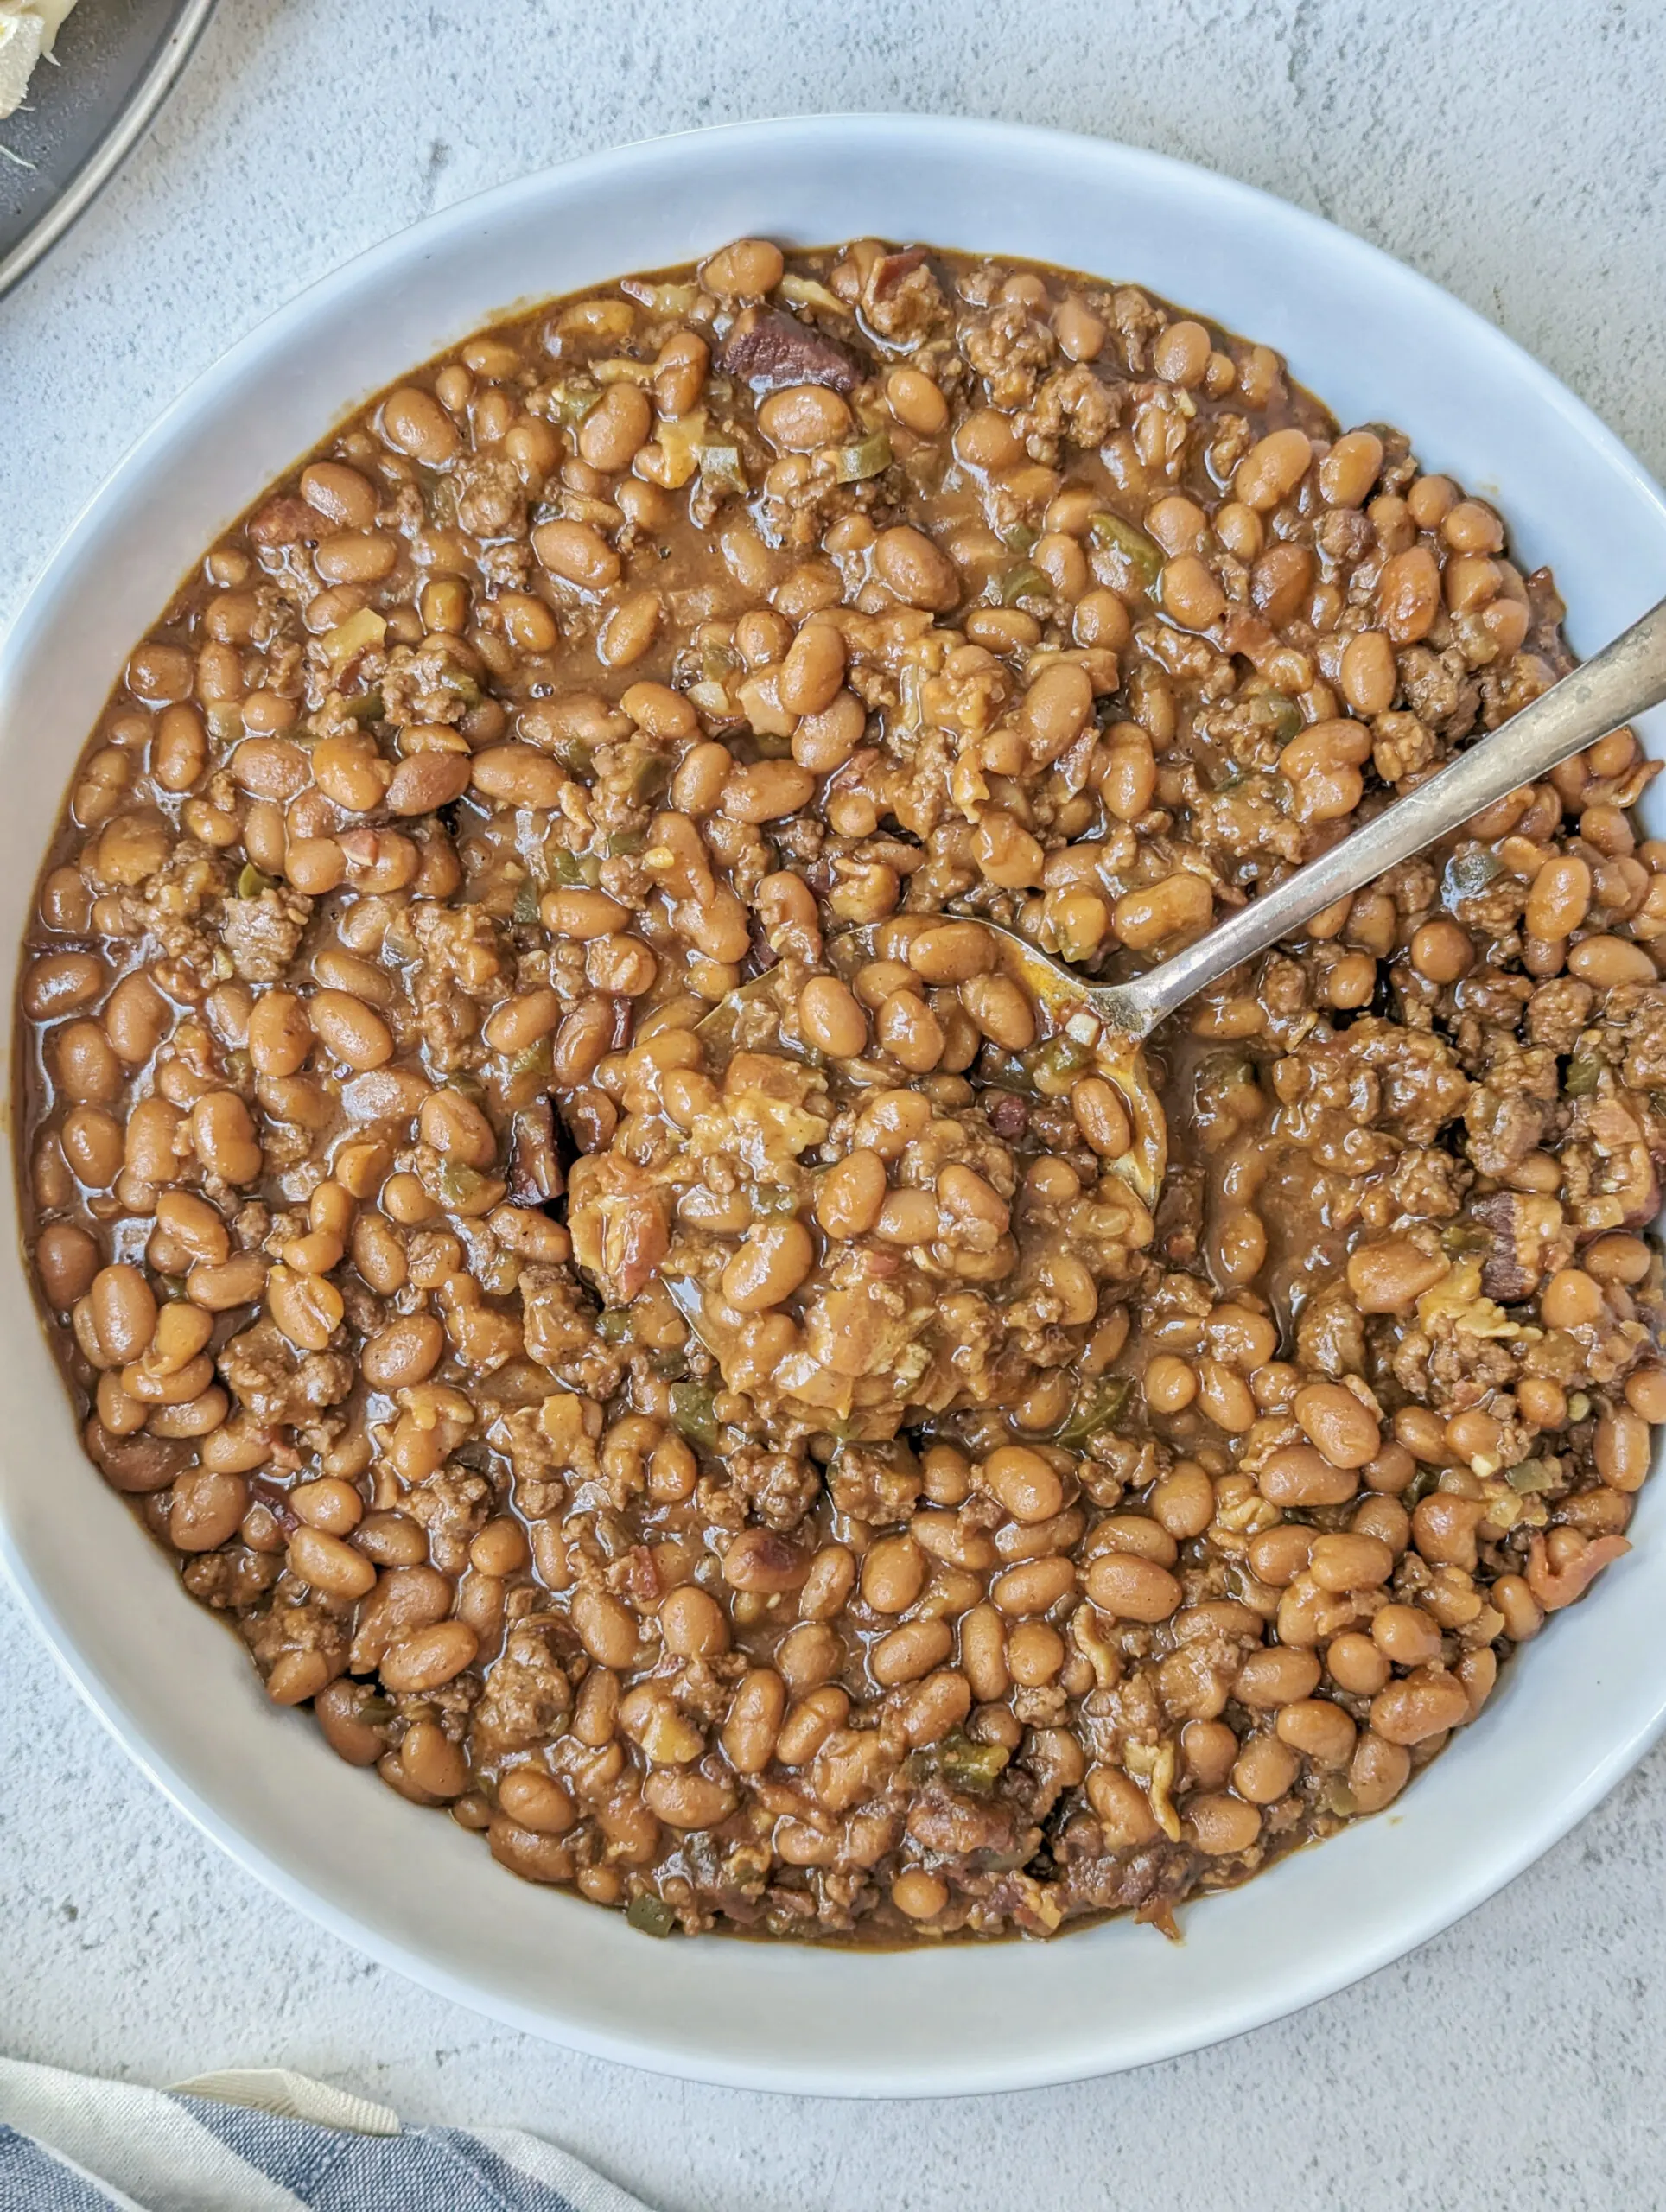 A serving bowl of baked beans with corn on the cob in the background.